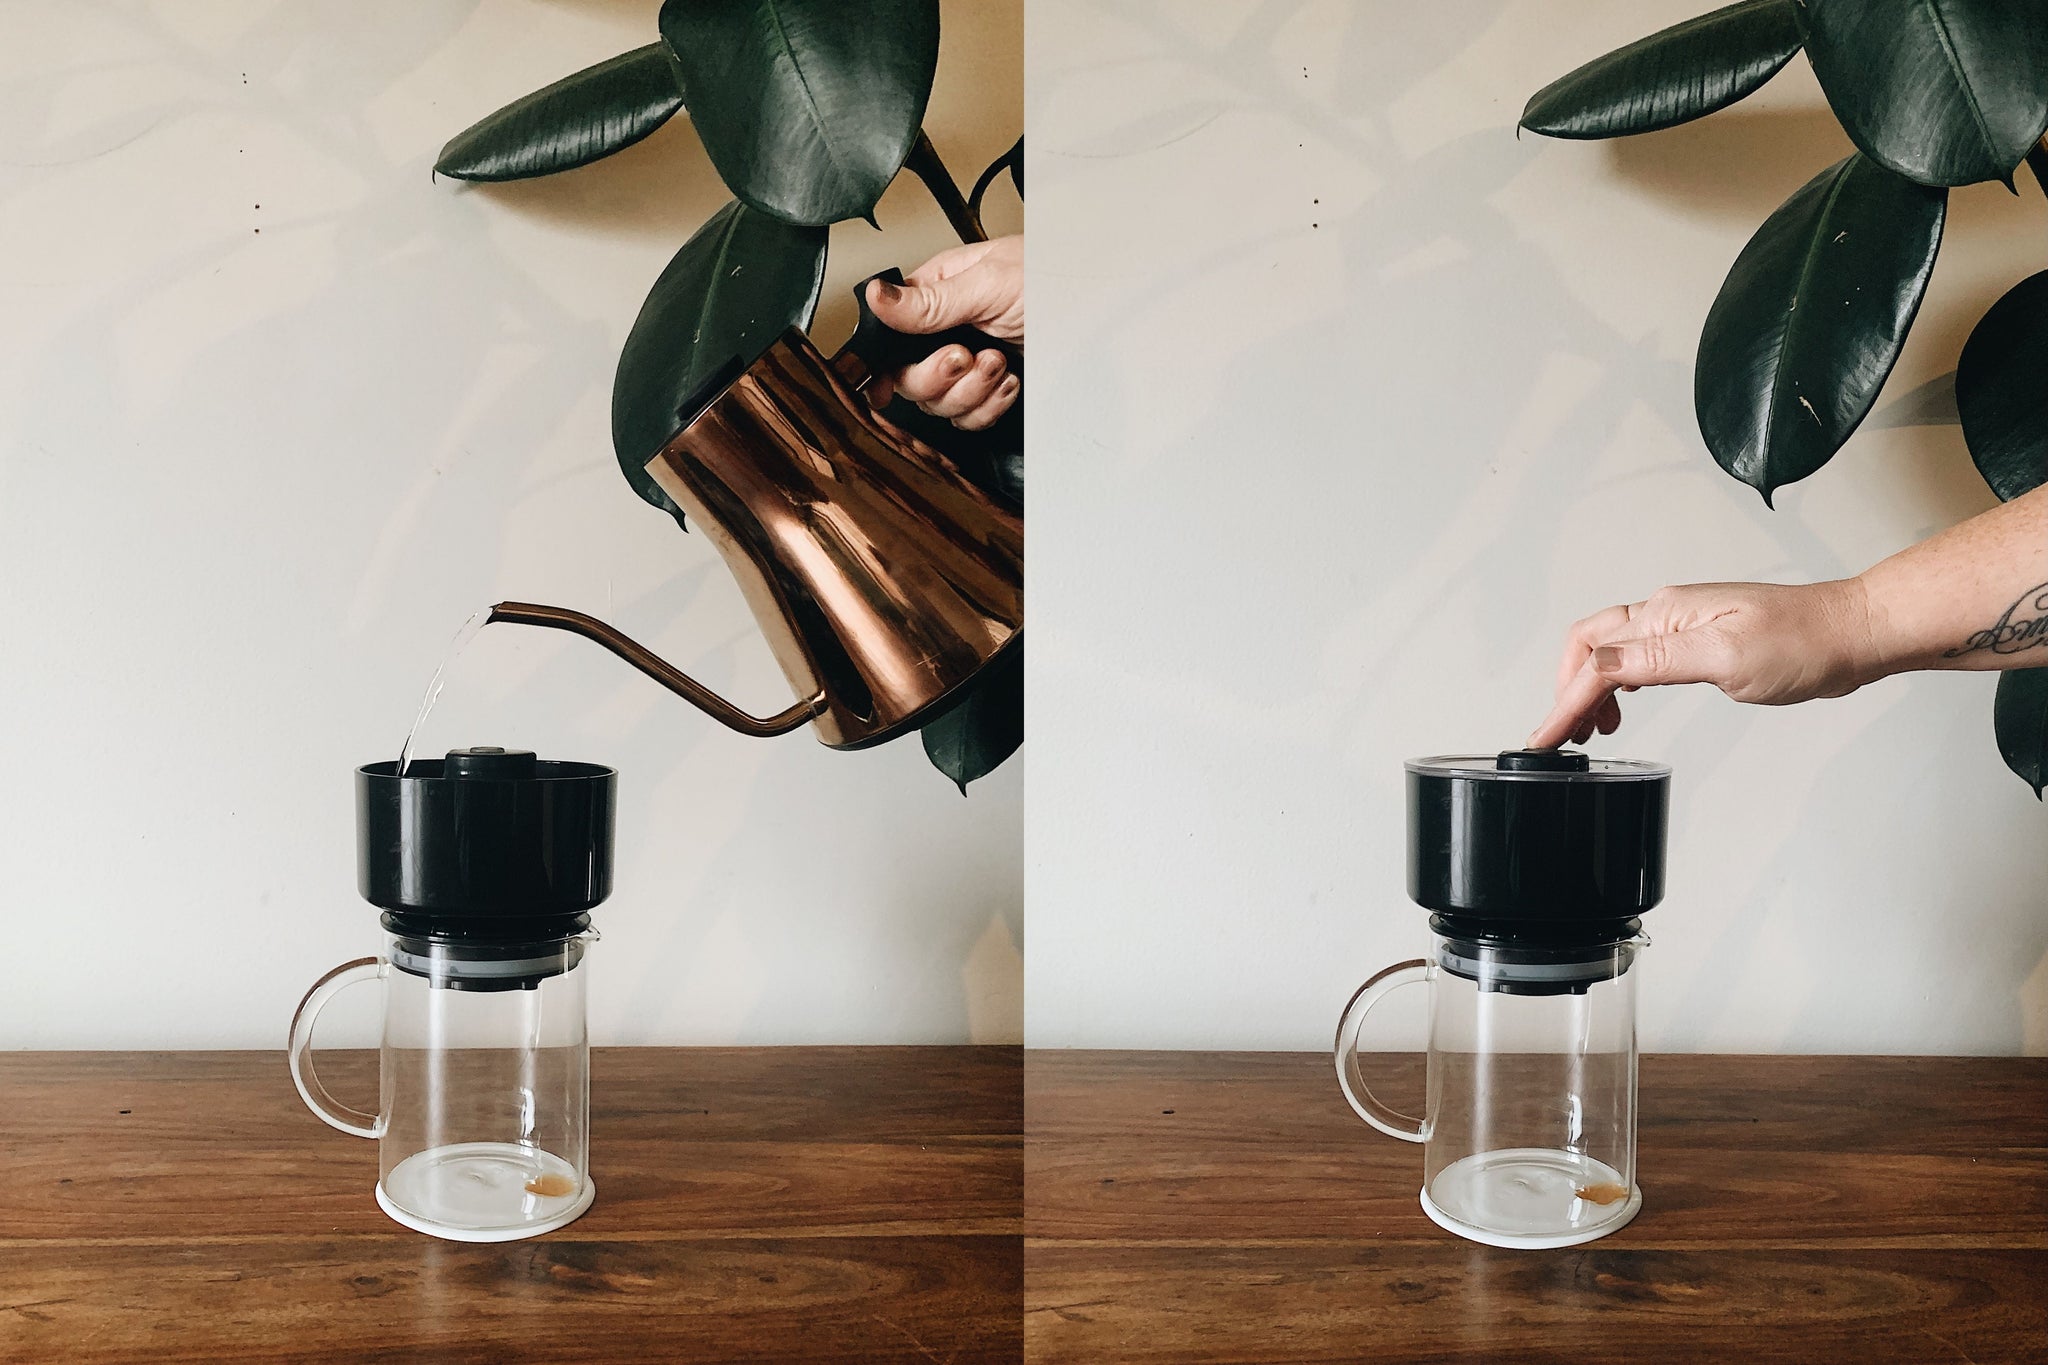 L: Pouring water into VacOne with Fellow Kettle; R: Pressing the button on VacOne